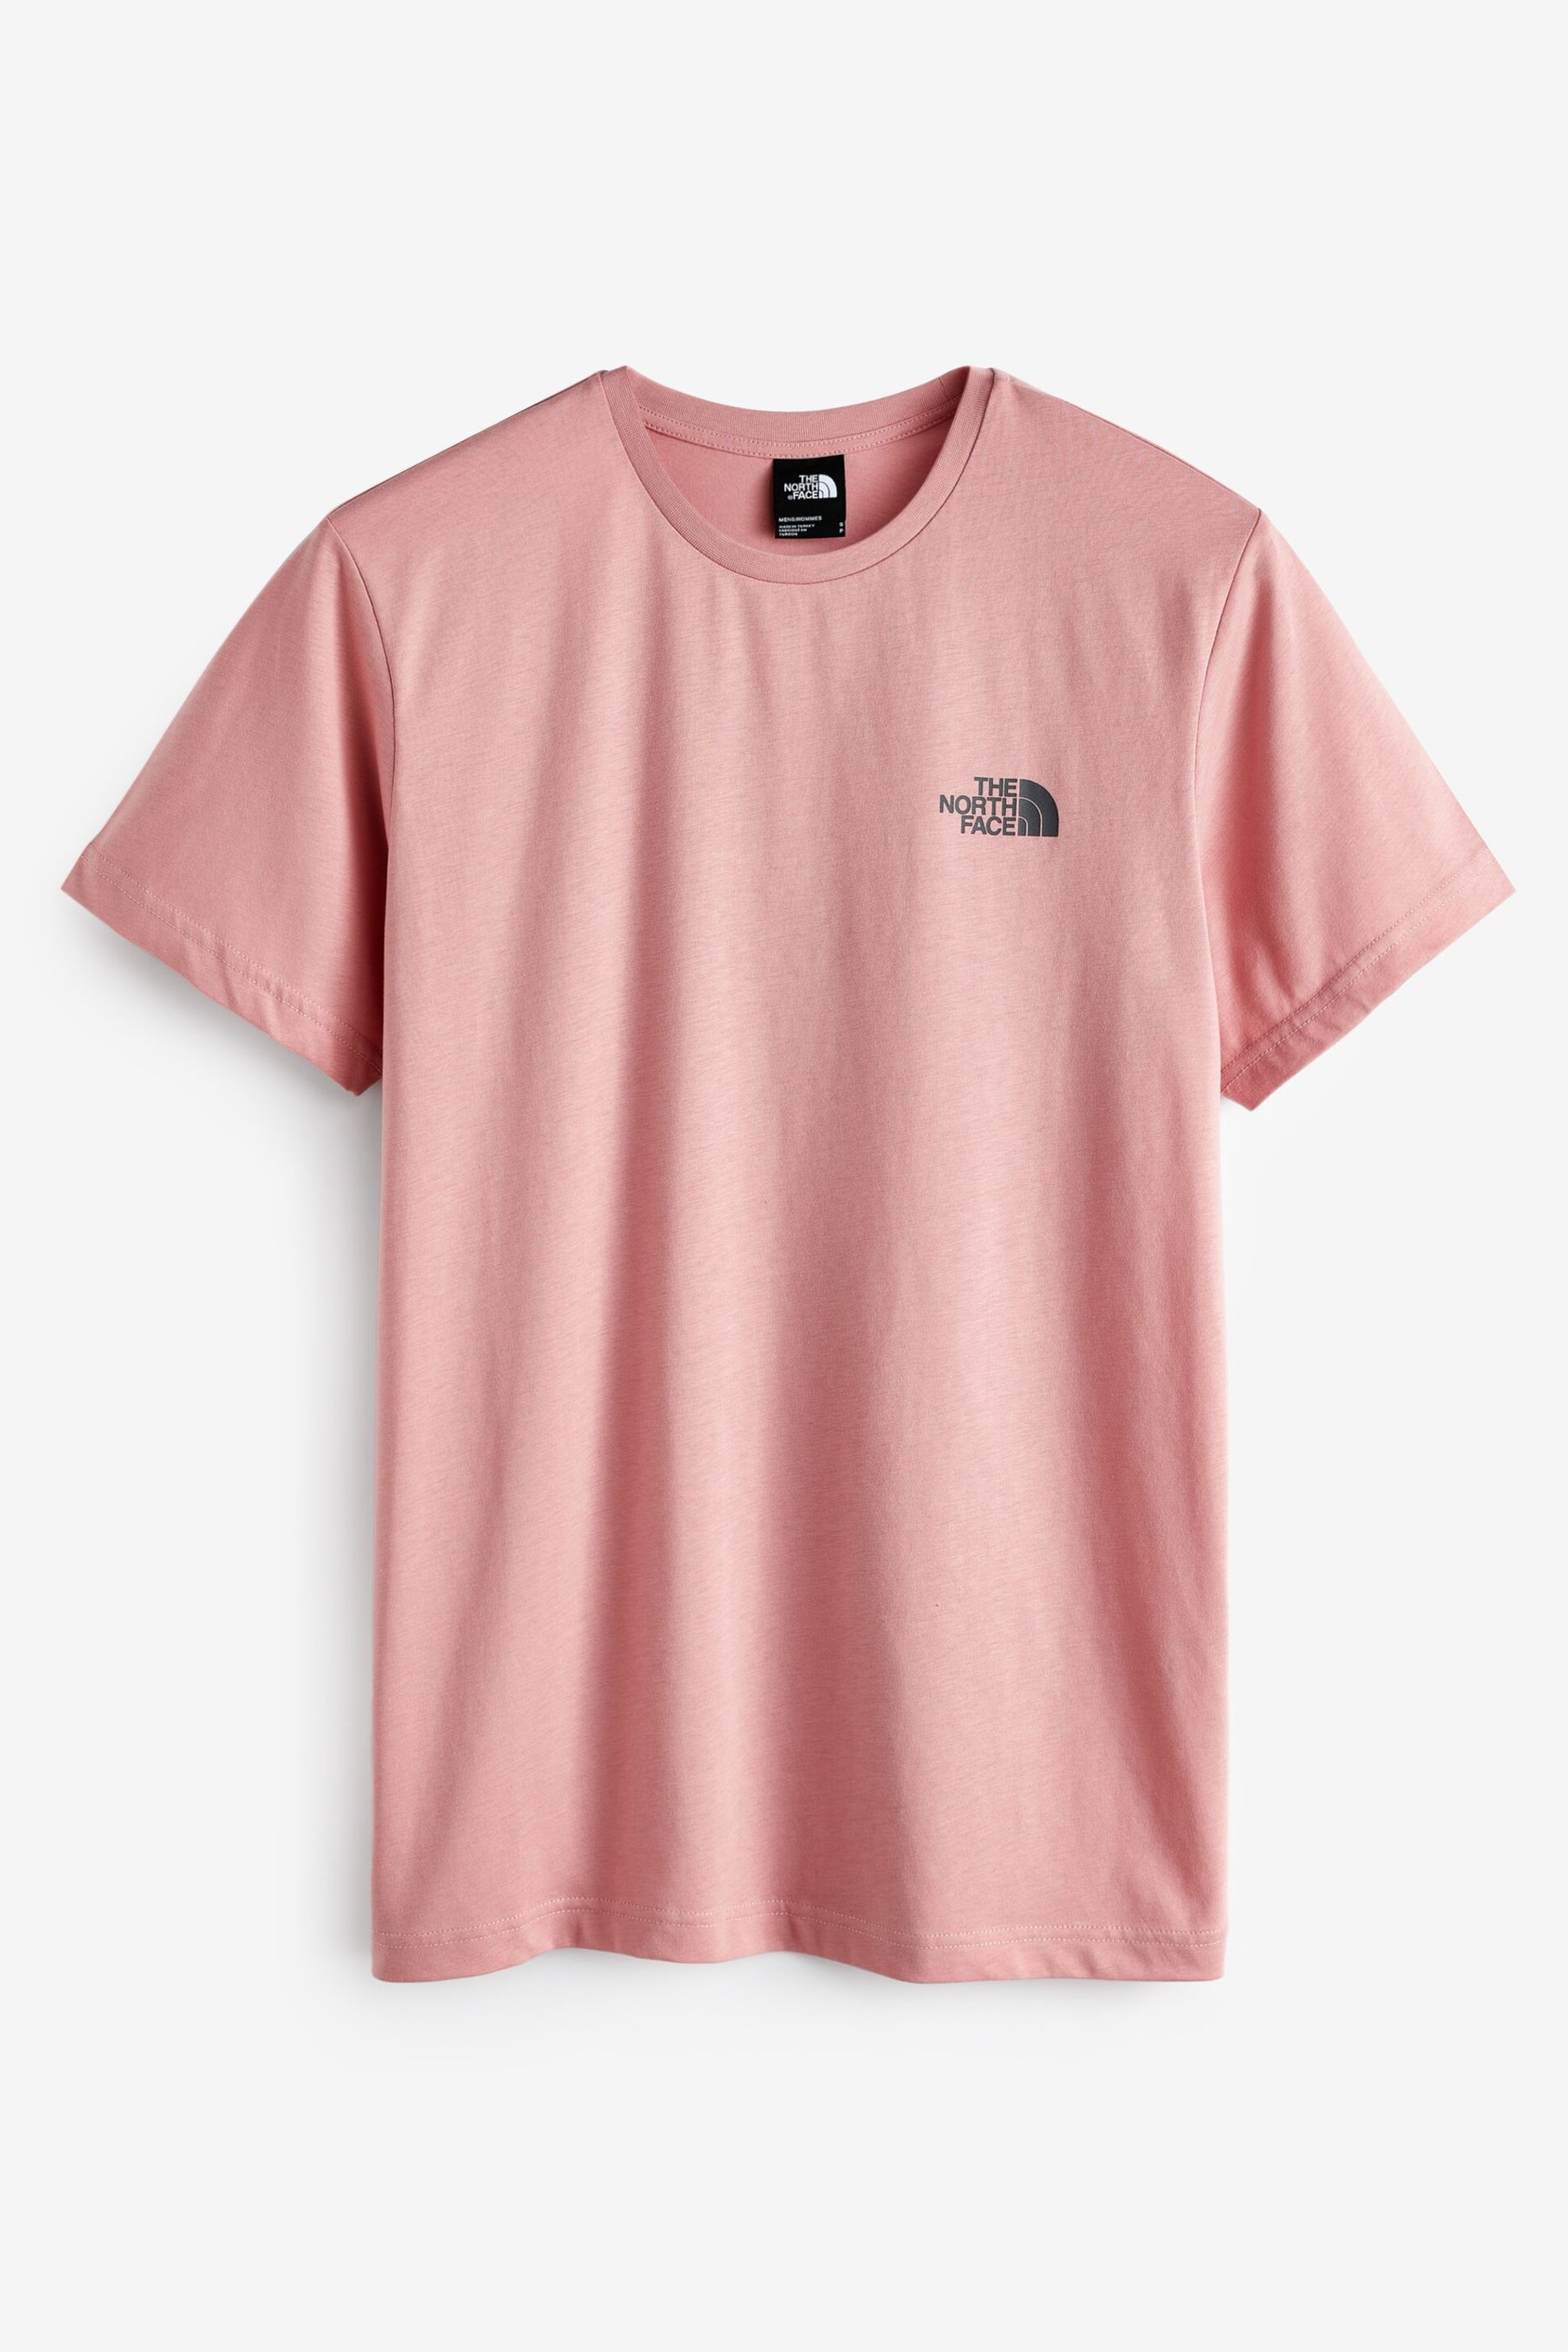 The North Face Rose Pink Half Dome Graphic Print T-Shirt - Image 4 of 4